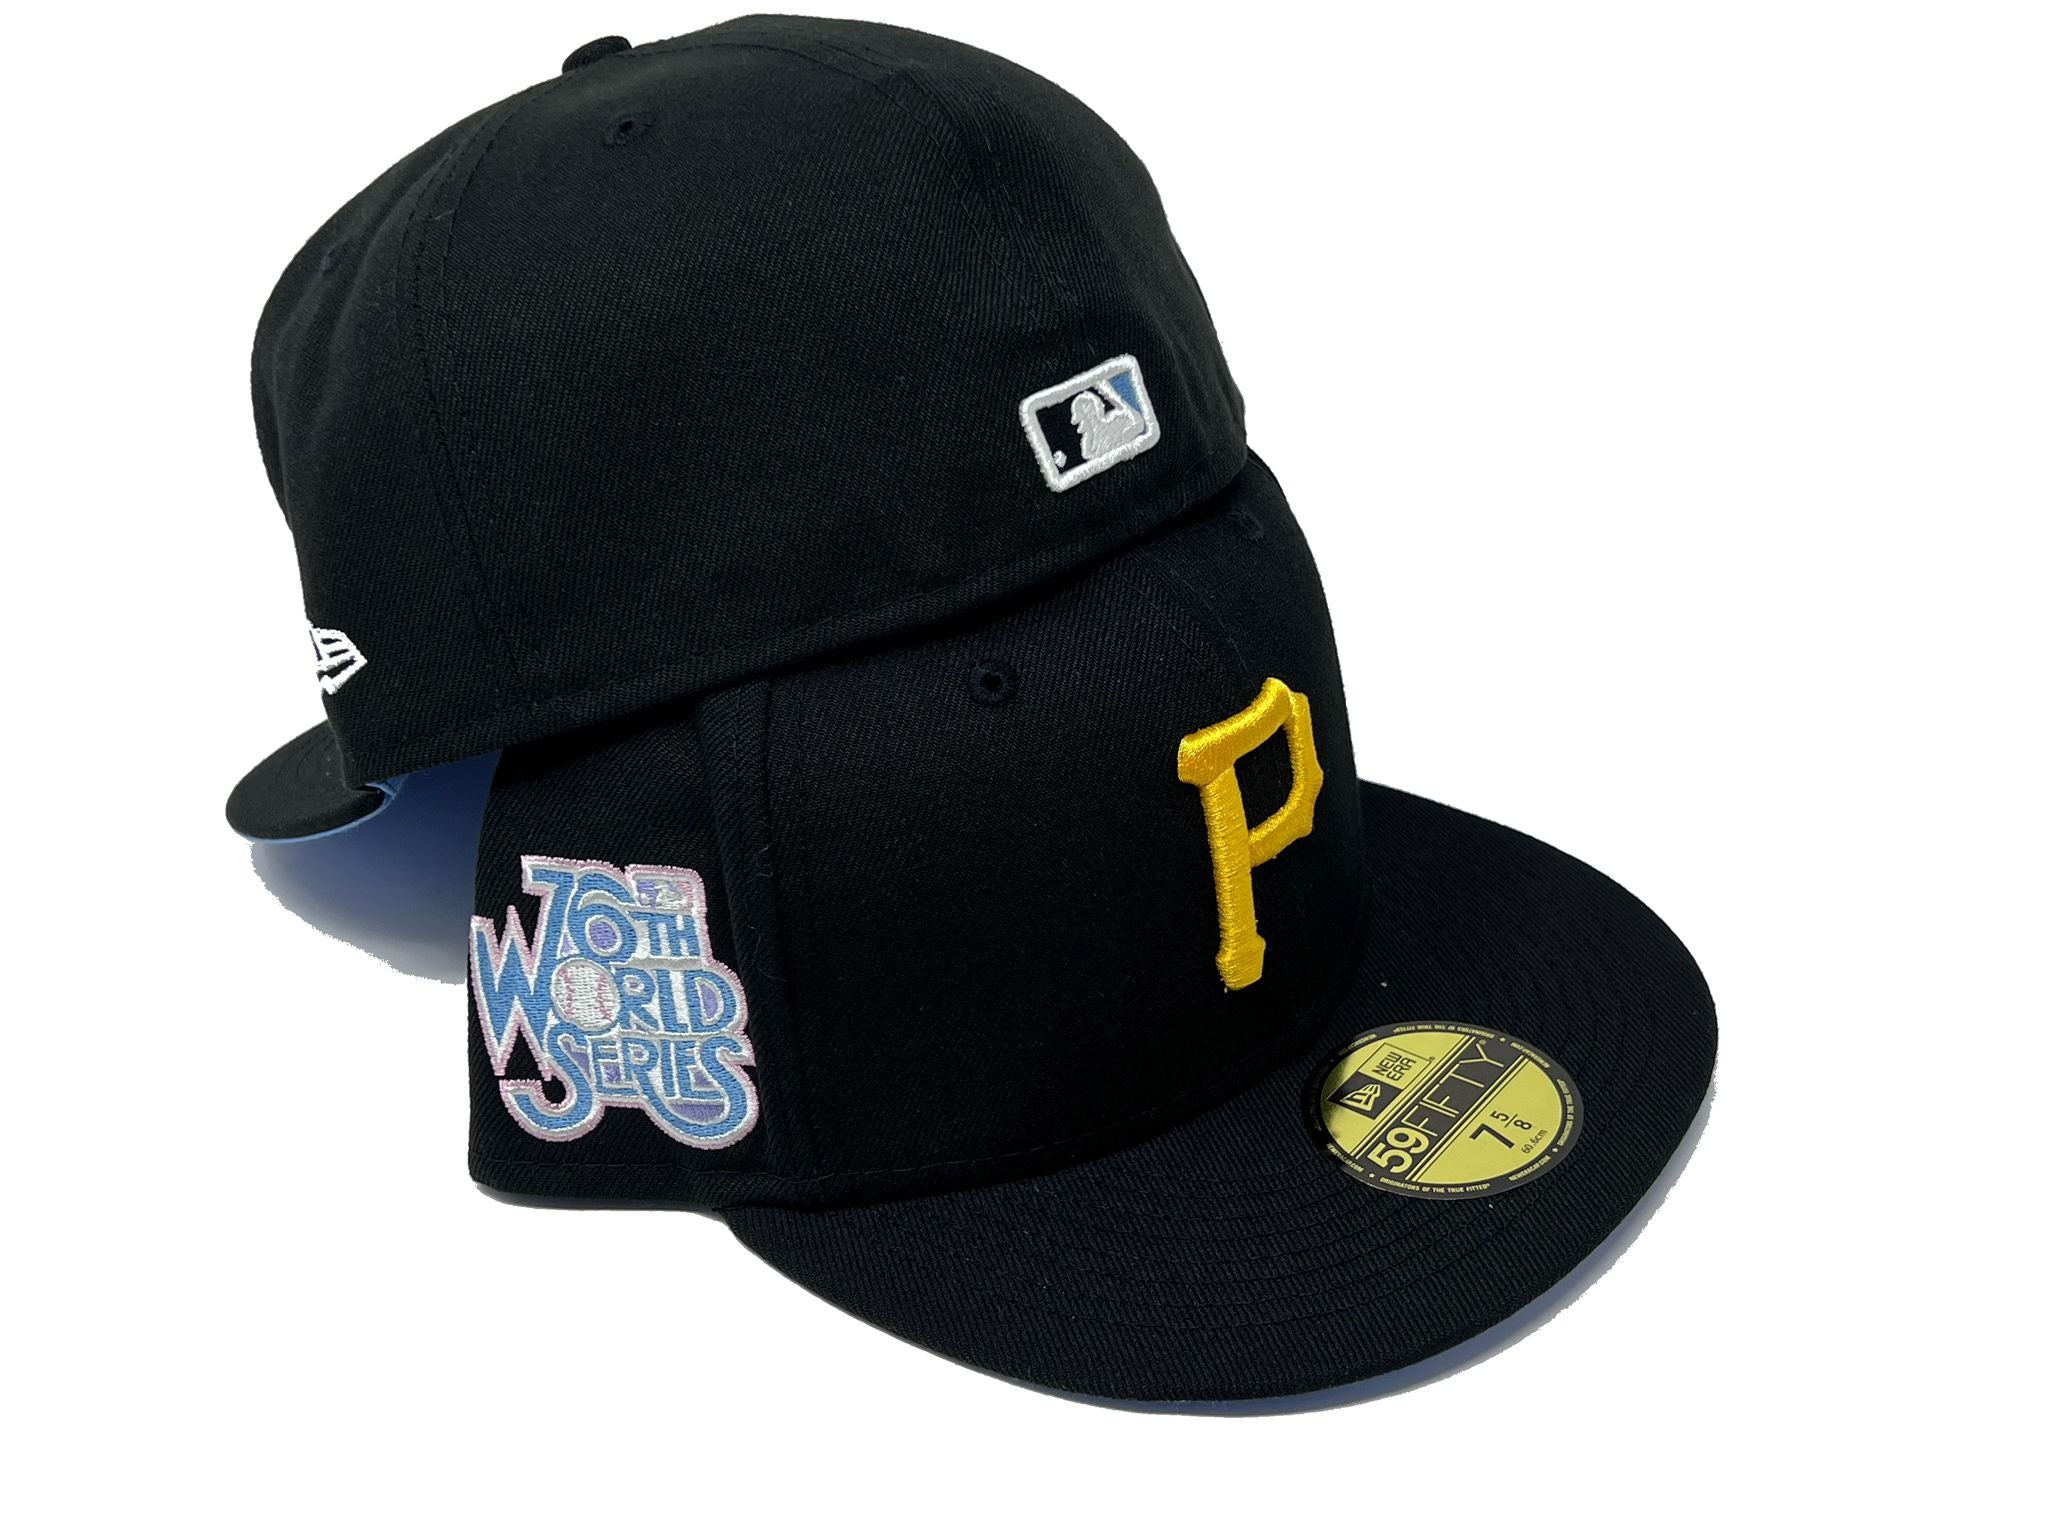 1979 Pittsburgh Pirates In Mlb Fan Apparel & Souvenirs for sale